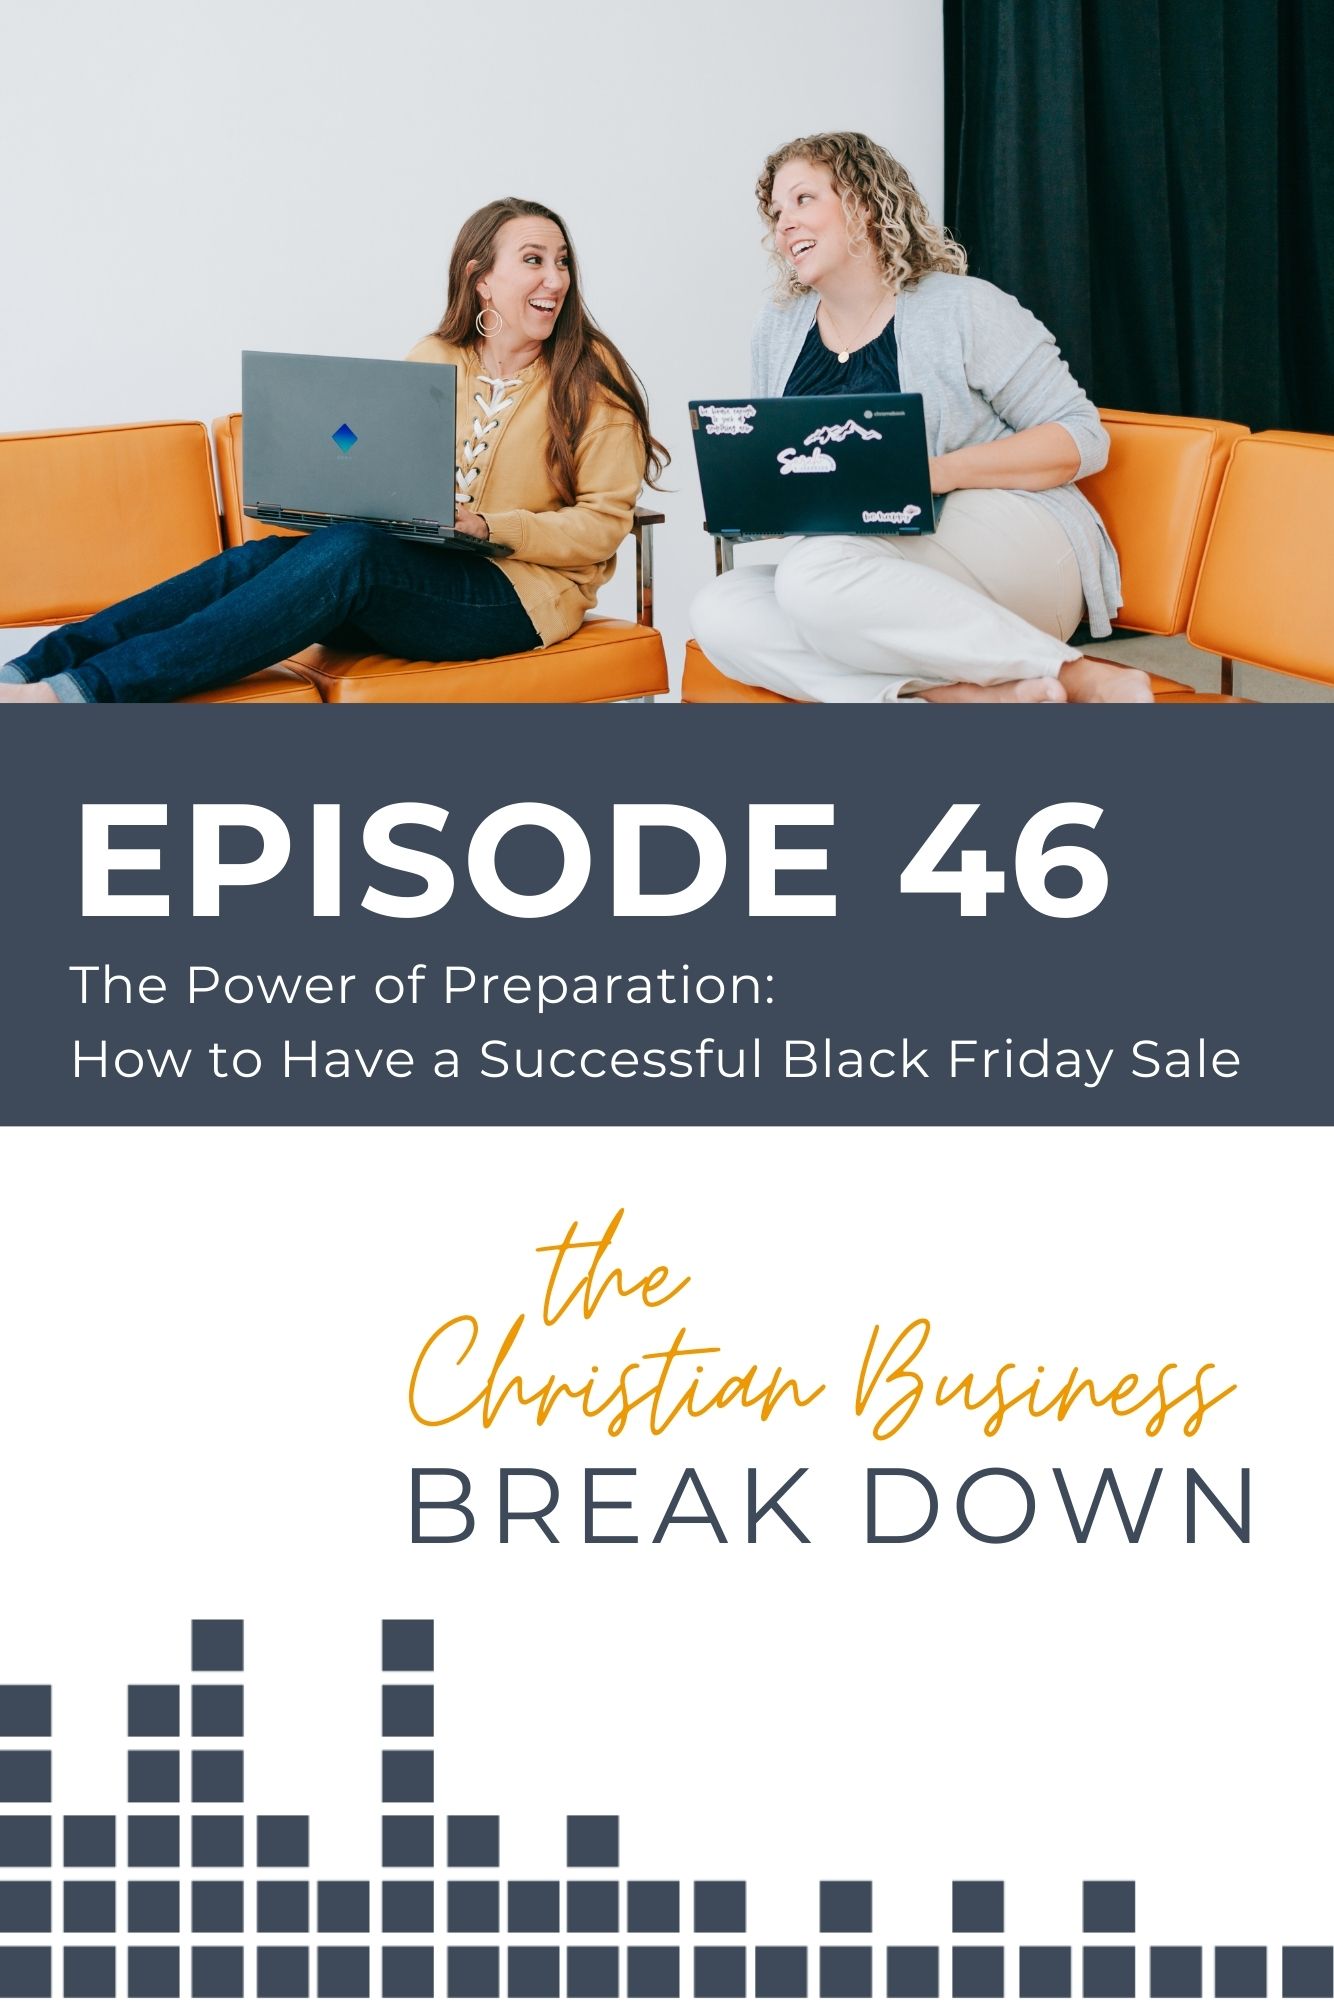 This episode of the Christian Business Breakdown Podcast for Christian business women is all about how to be prepared for black friday sales and shows a graphic of two entrepreneurs working on computers while sitting on orange couches.